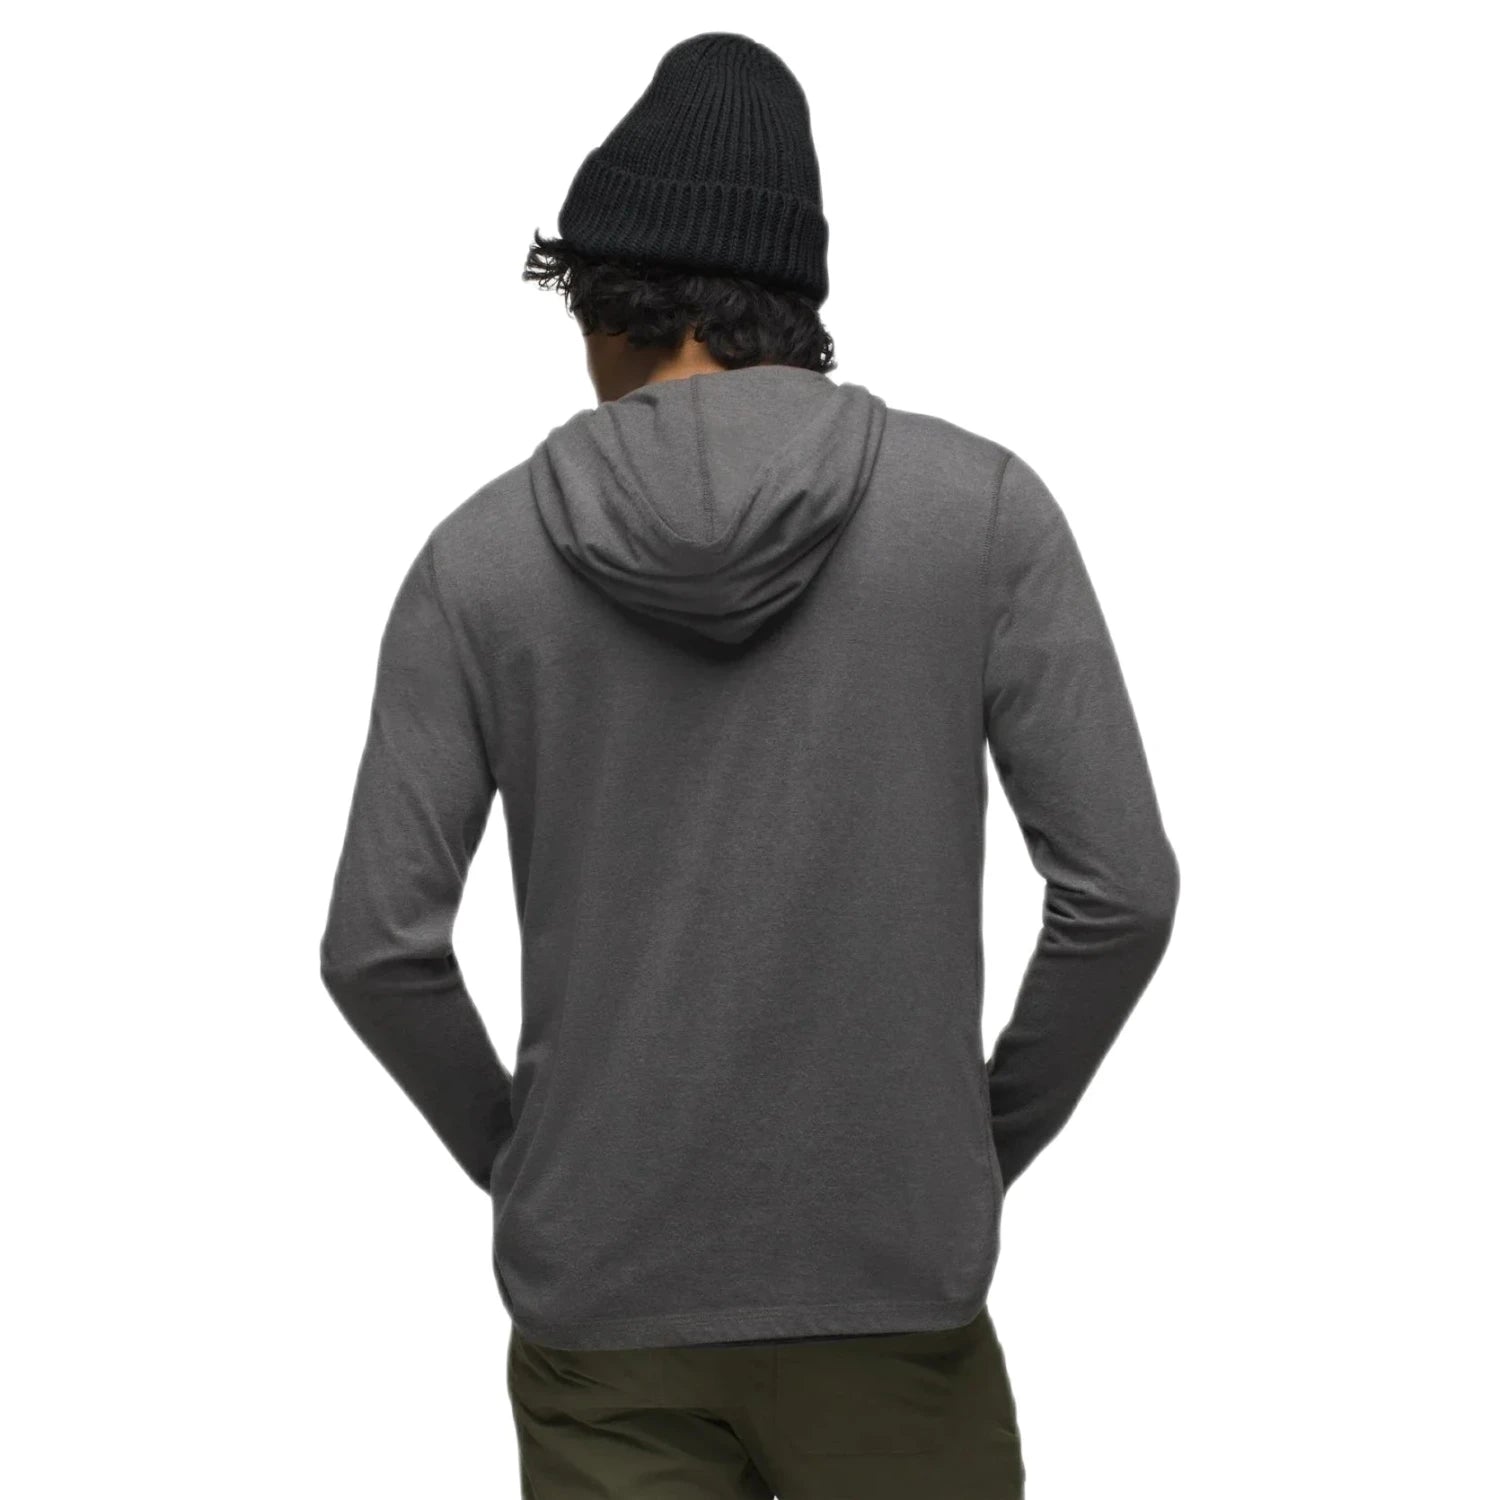 prAna Men's Hooded T-Shirt shown on model in Charcoal Heather color option. Back view.